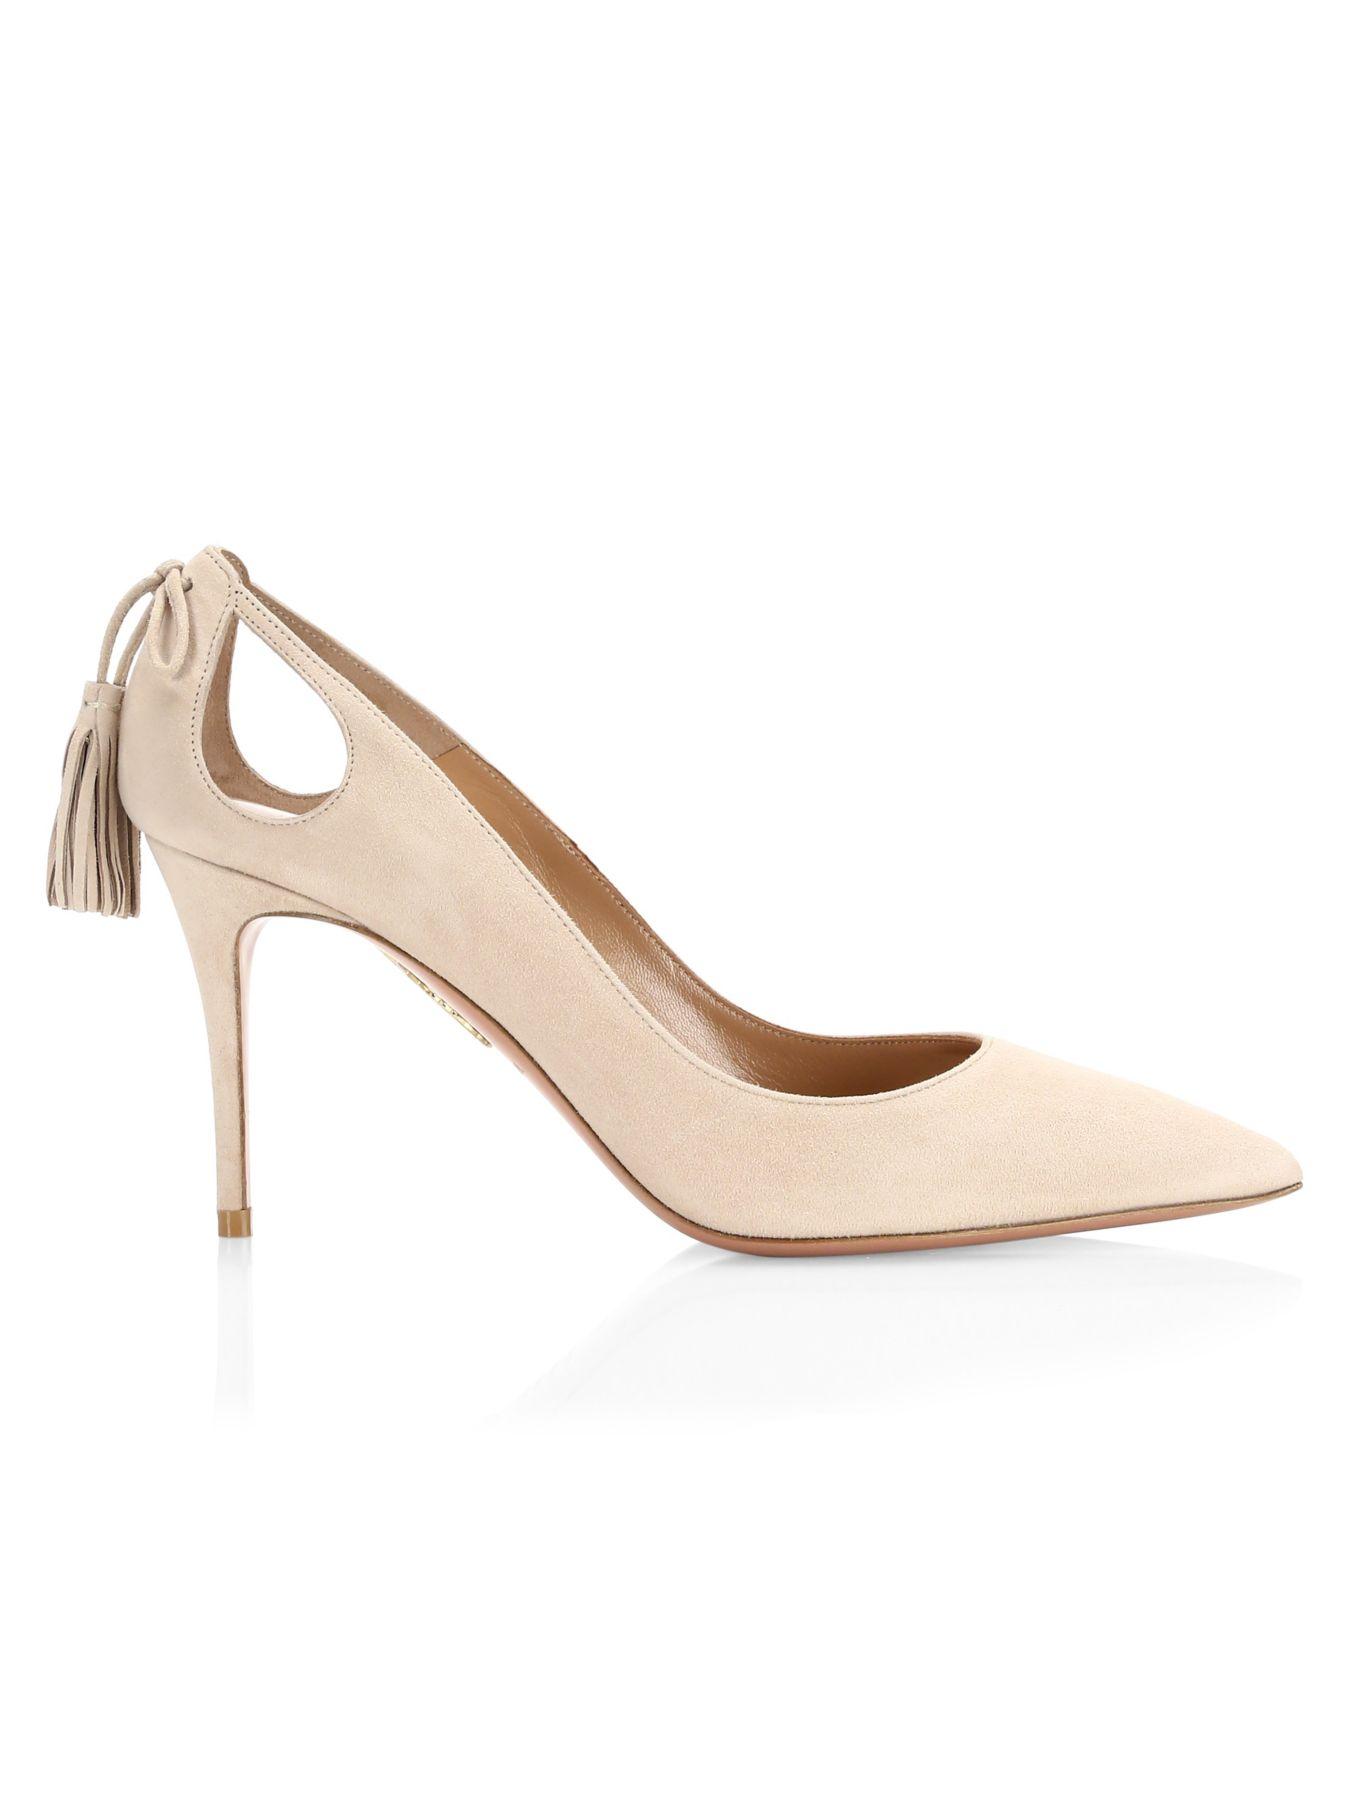 Aquazzura Forever Marilyn Cutout Suede Pumps In Nude Natural Lyst | My ...